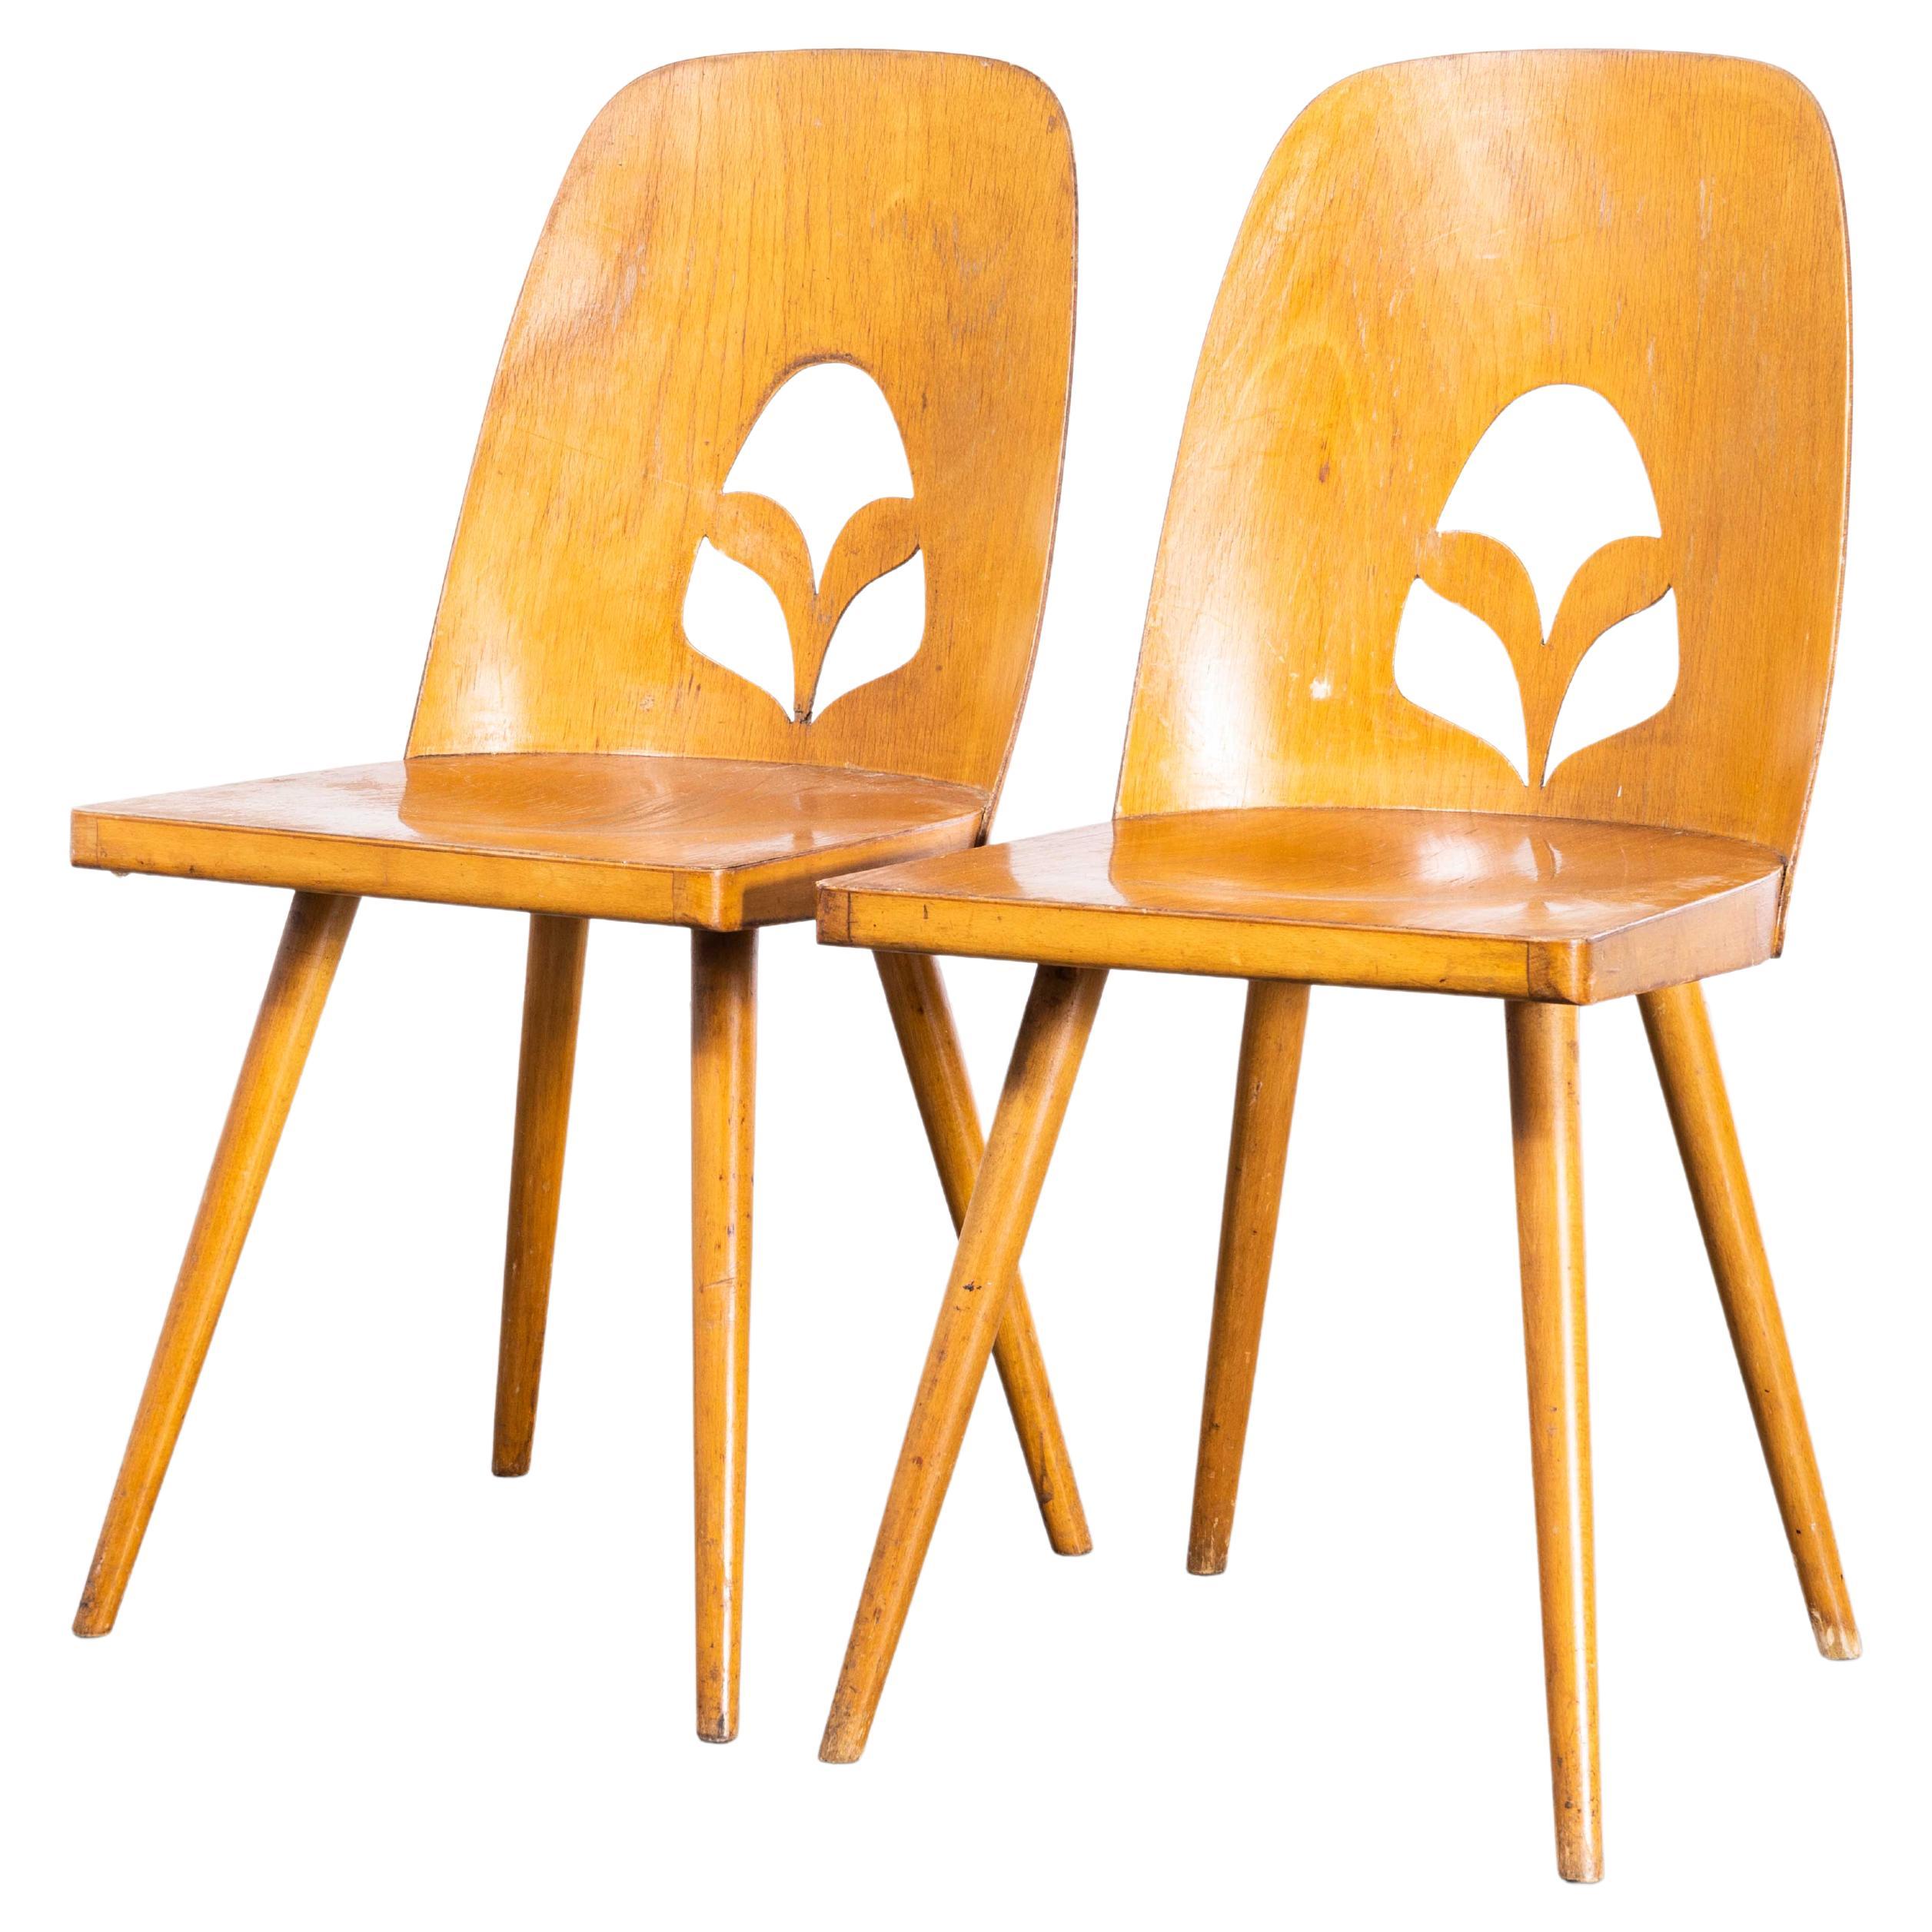 1950s Fretwork Detail Dining Chairs by Radomir Hoffman, Pair For Sale